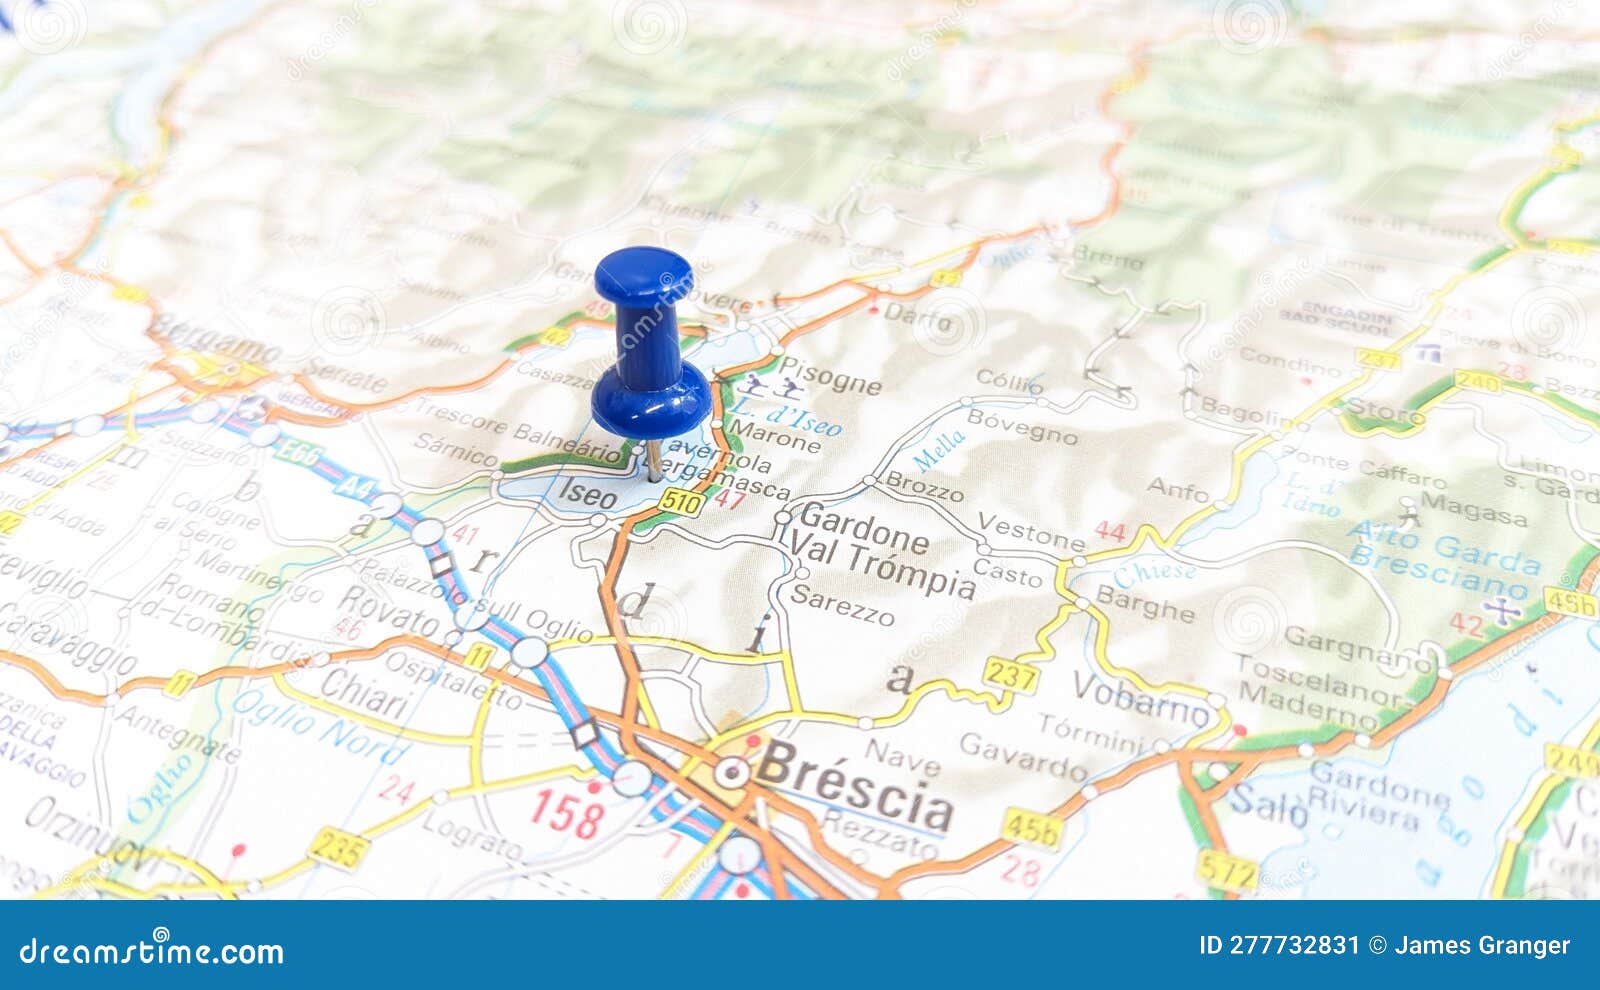 a blue pin stuck in lake iseo on a map of italy